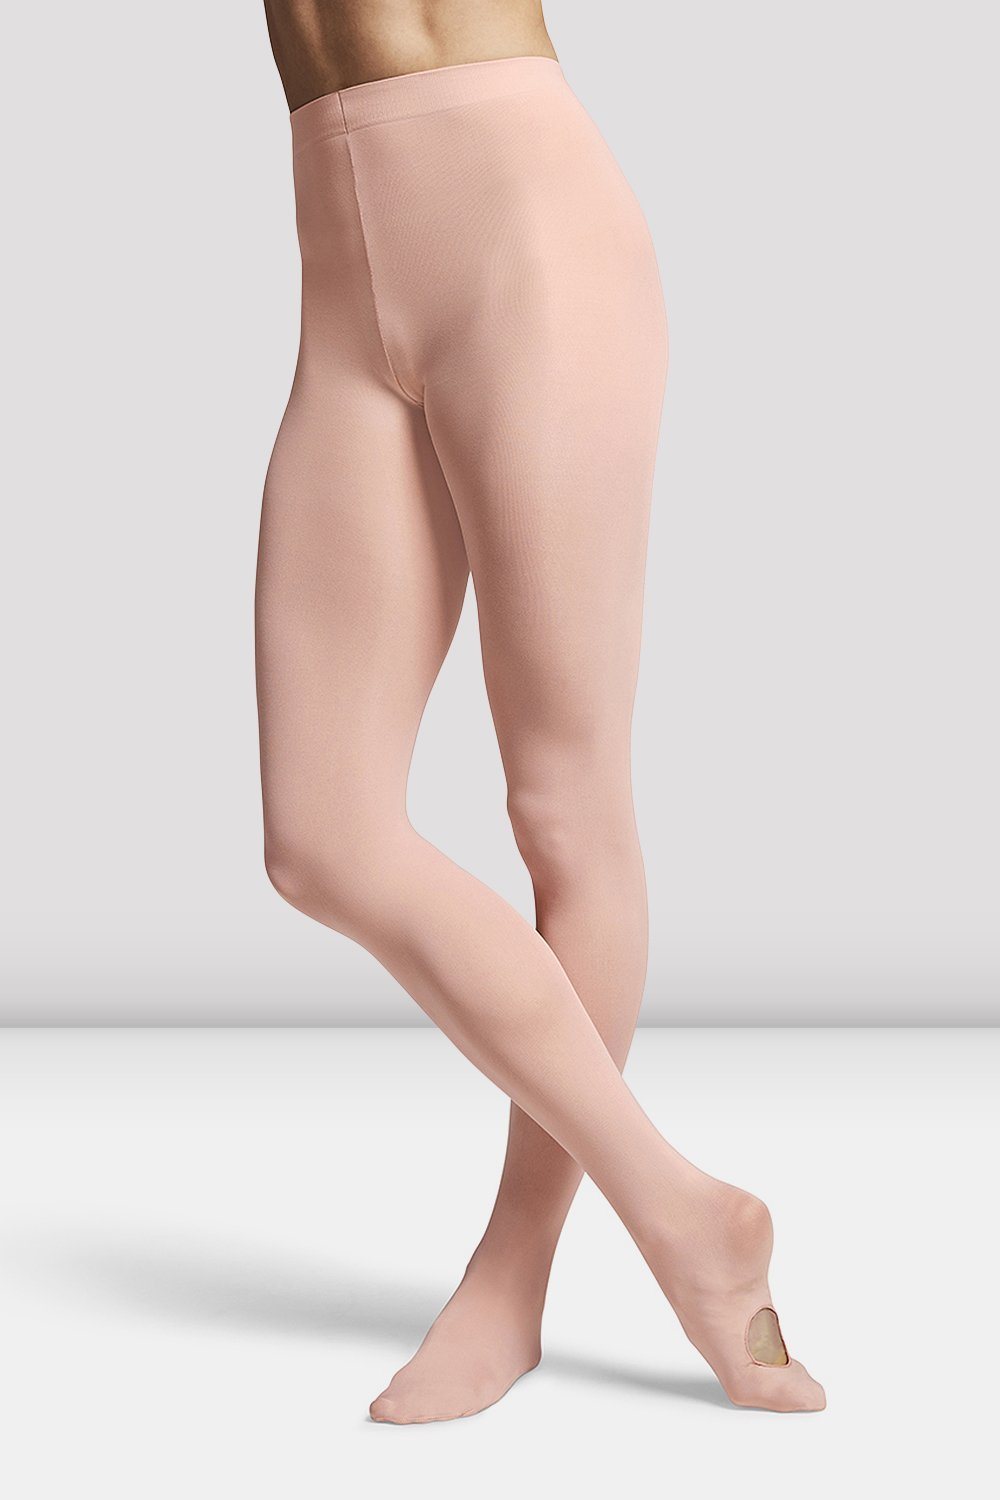 Bloch Adult ContourSoft Convertible Tights